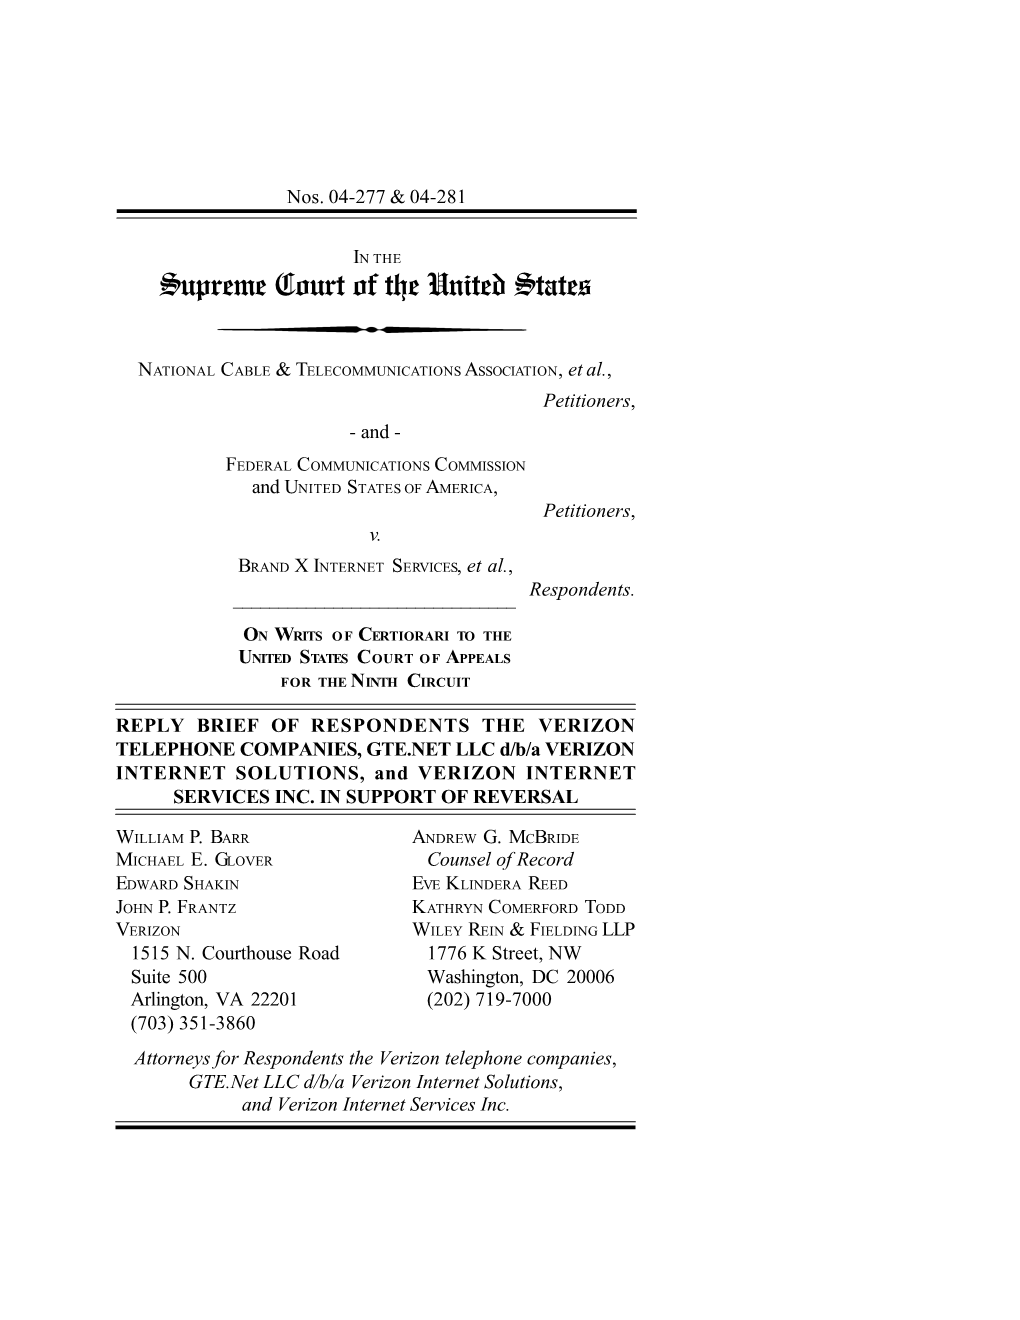 Reply Brief for Respondents the Verizon Telephone Cos. Et Al. In